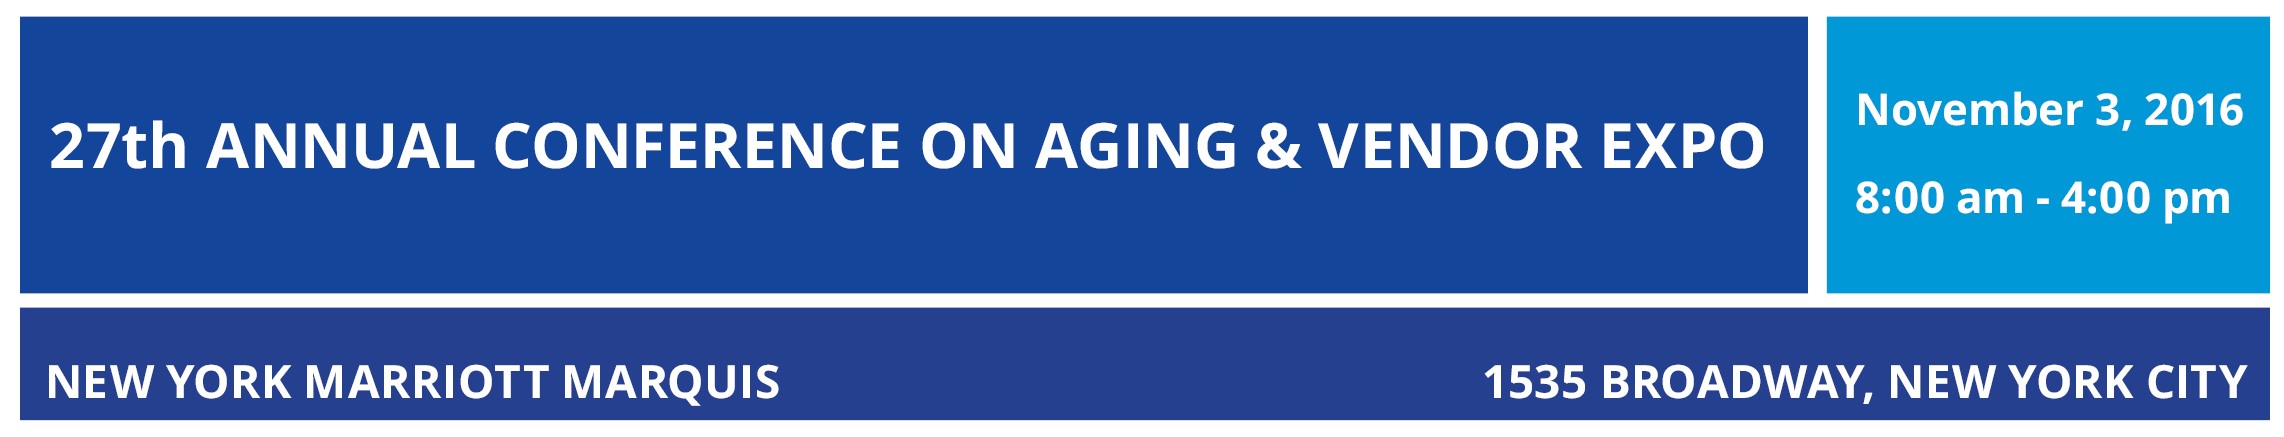 LiveOn NY's Annual Conference on Aging Registration Form